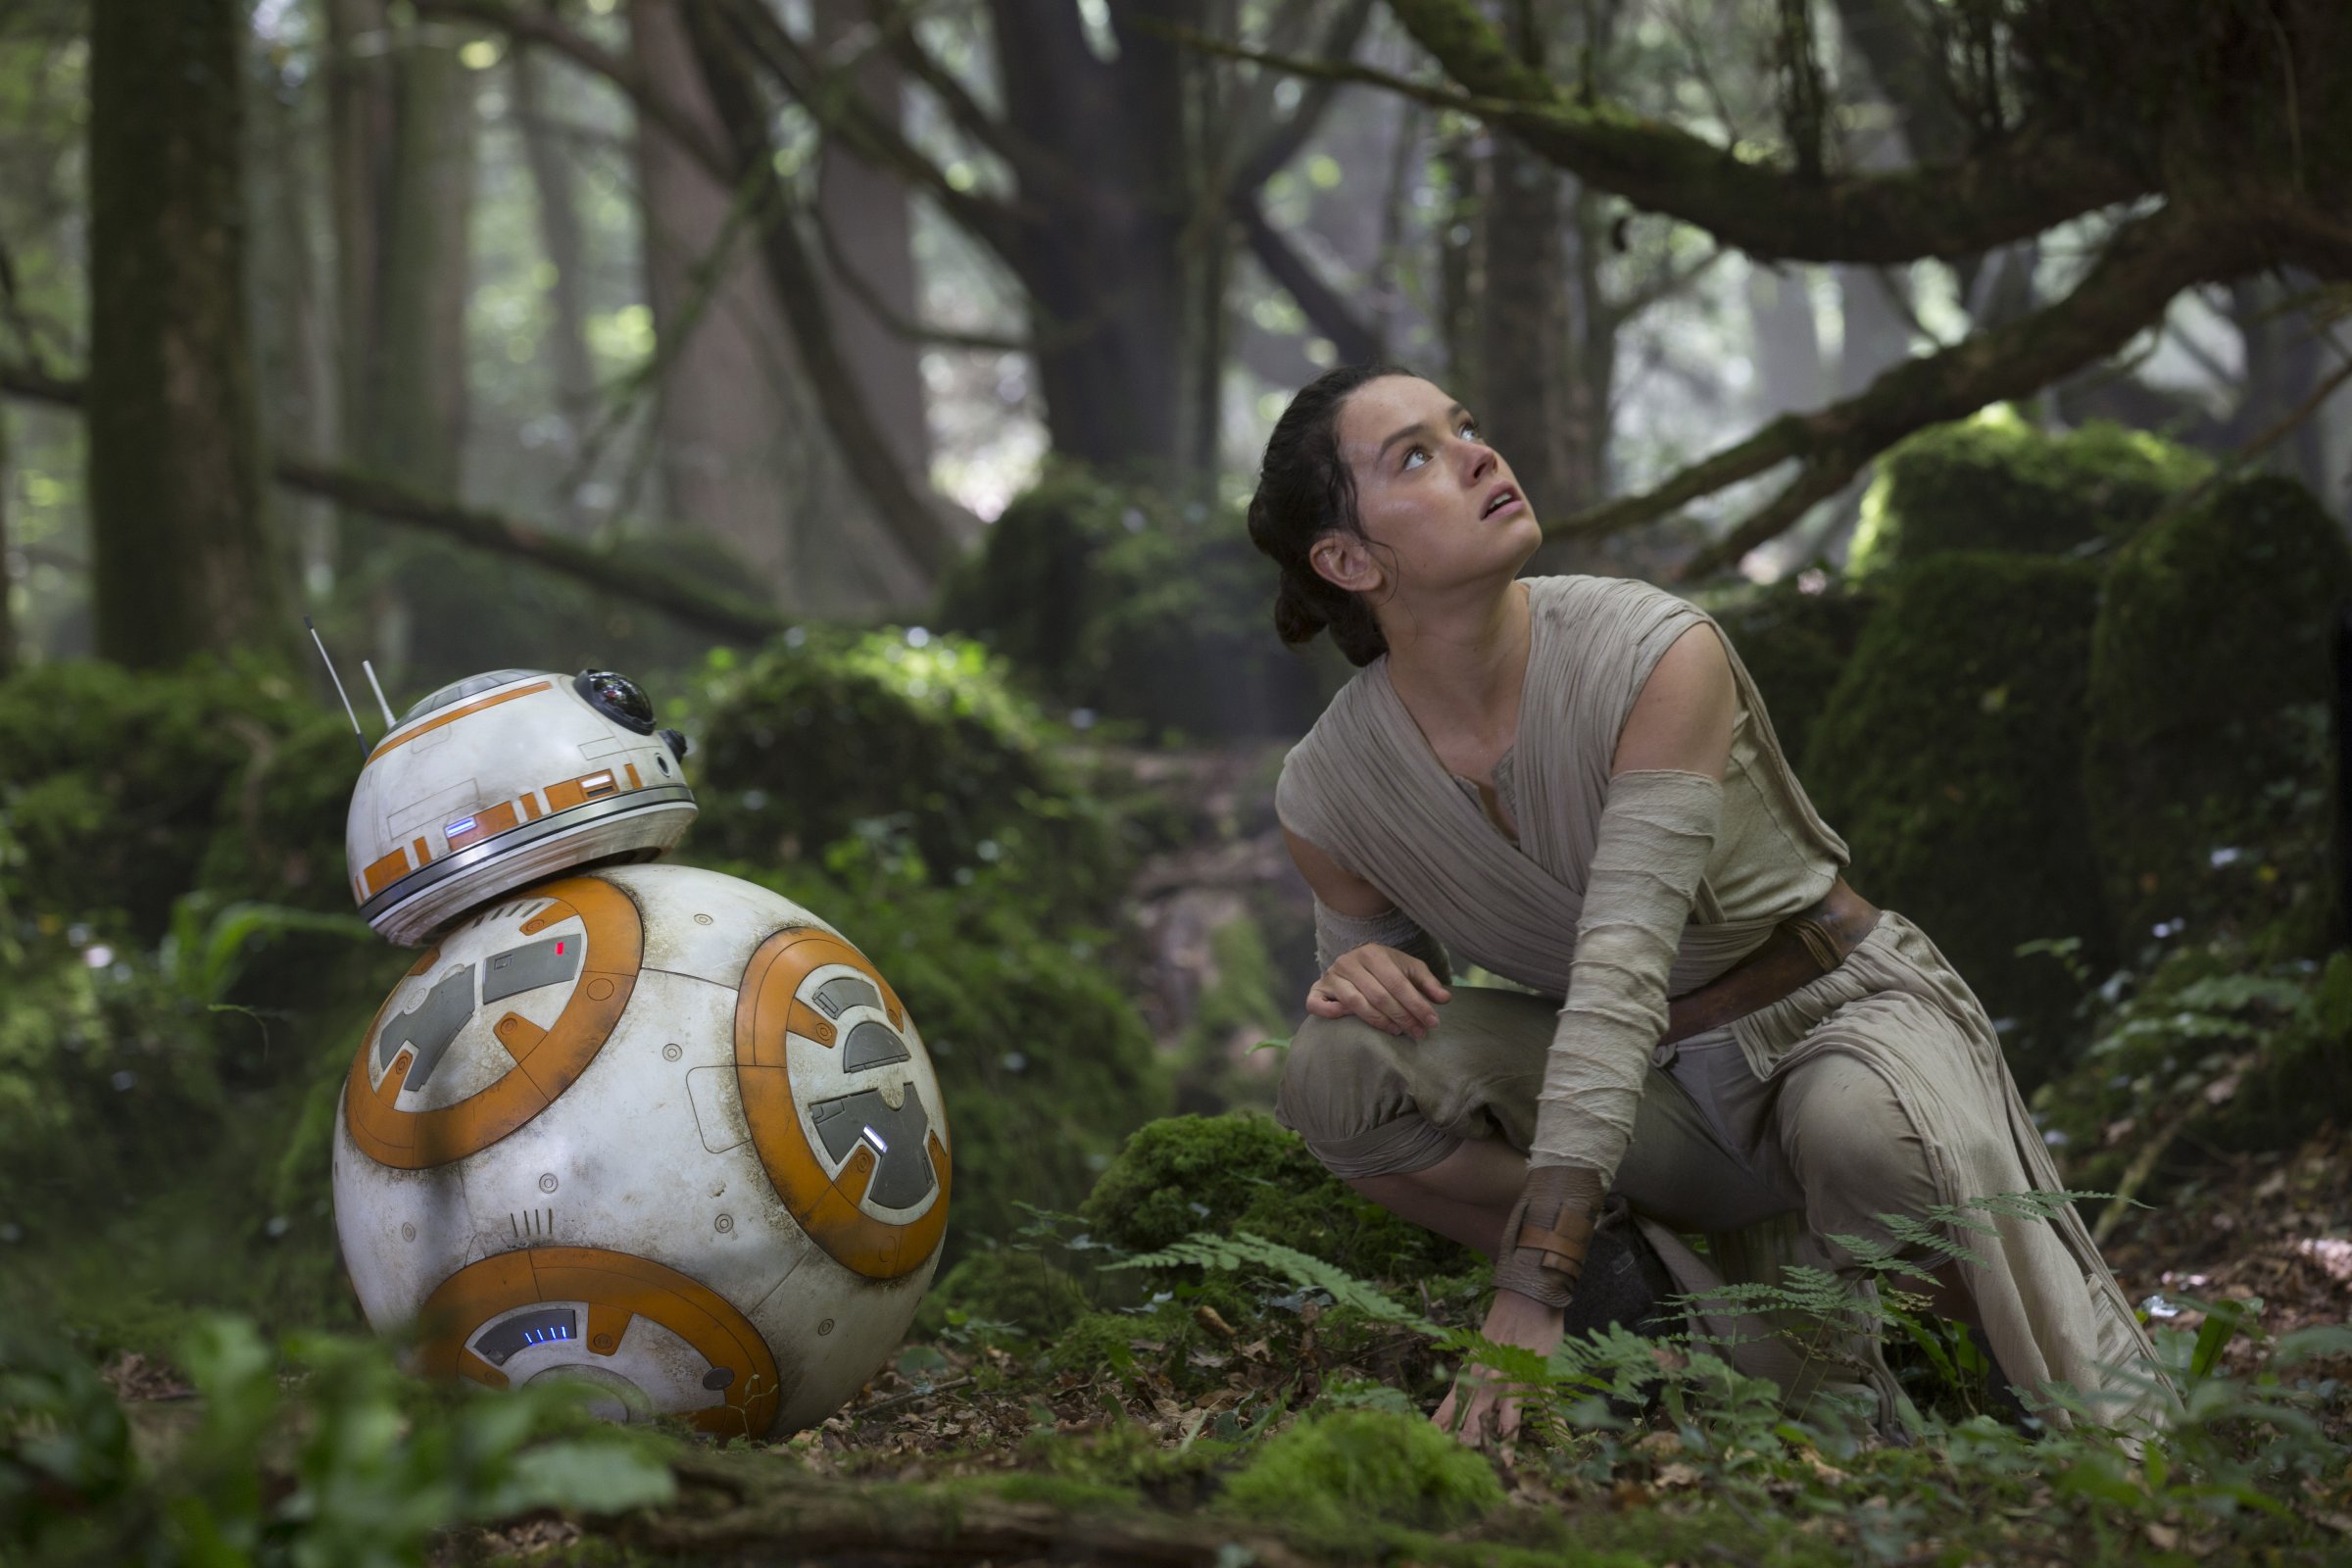 Star Wars: The Force AwakensL to R: BB-8 and Rey (Daisy Ridley)Ph: David James© 2015 Lucasfilm Ltd. & TM. All Right Reserved.